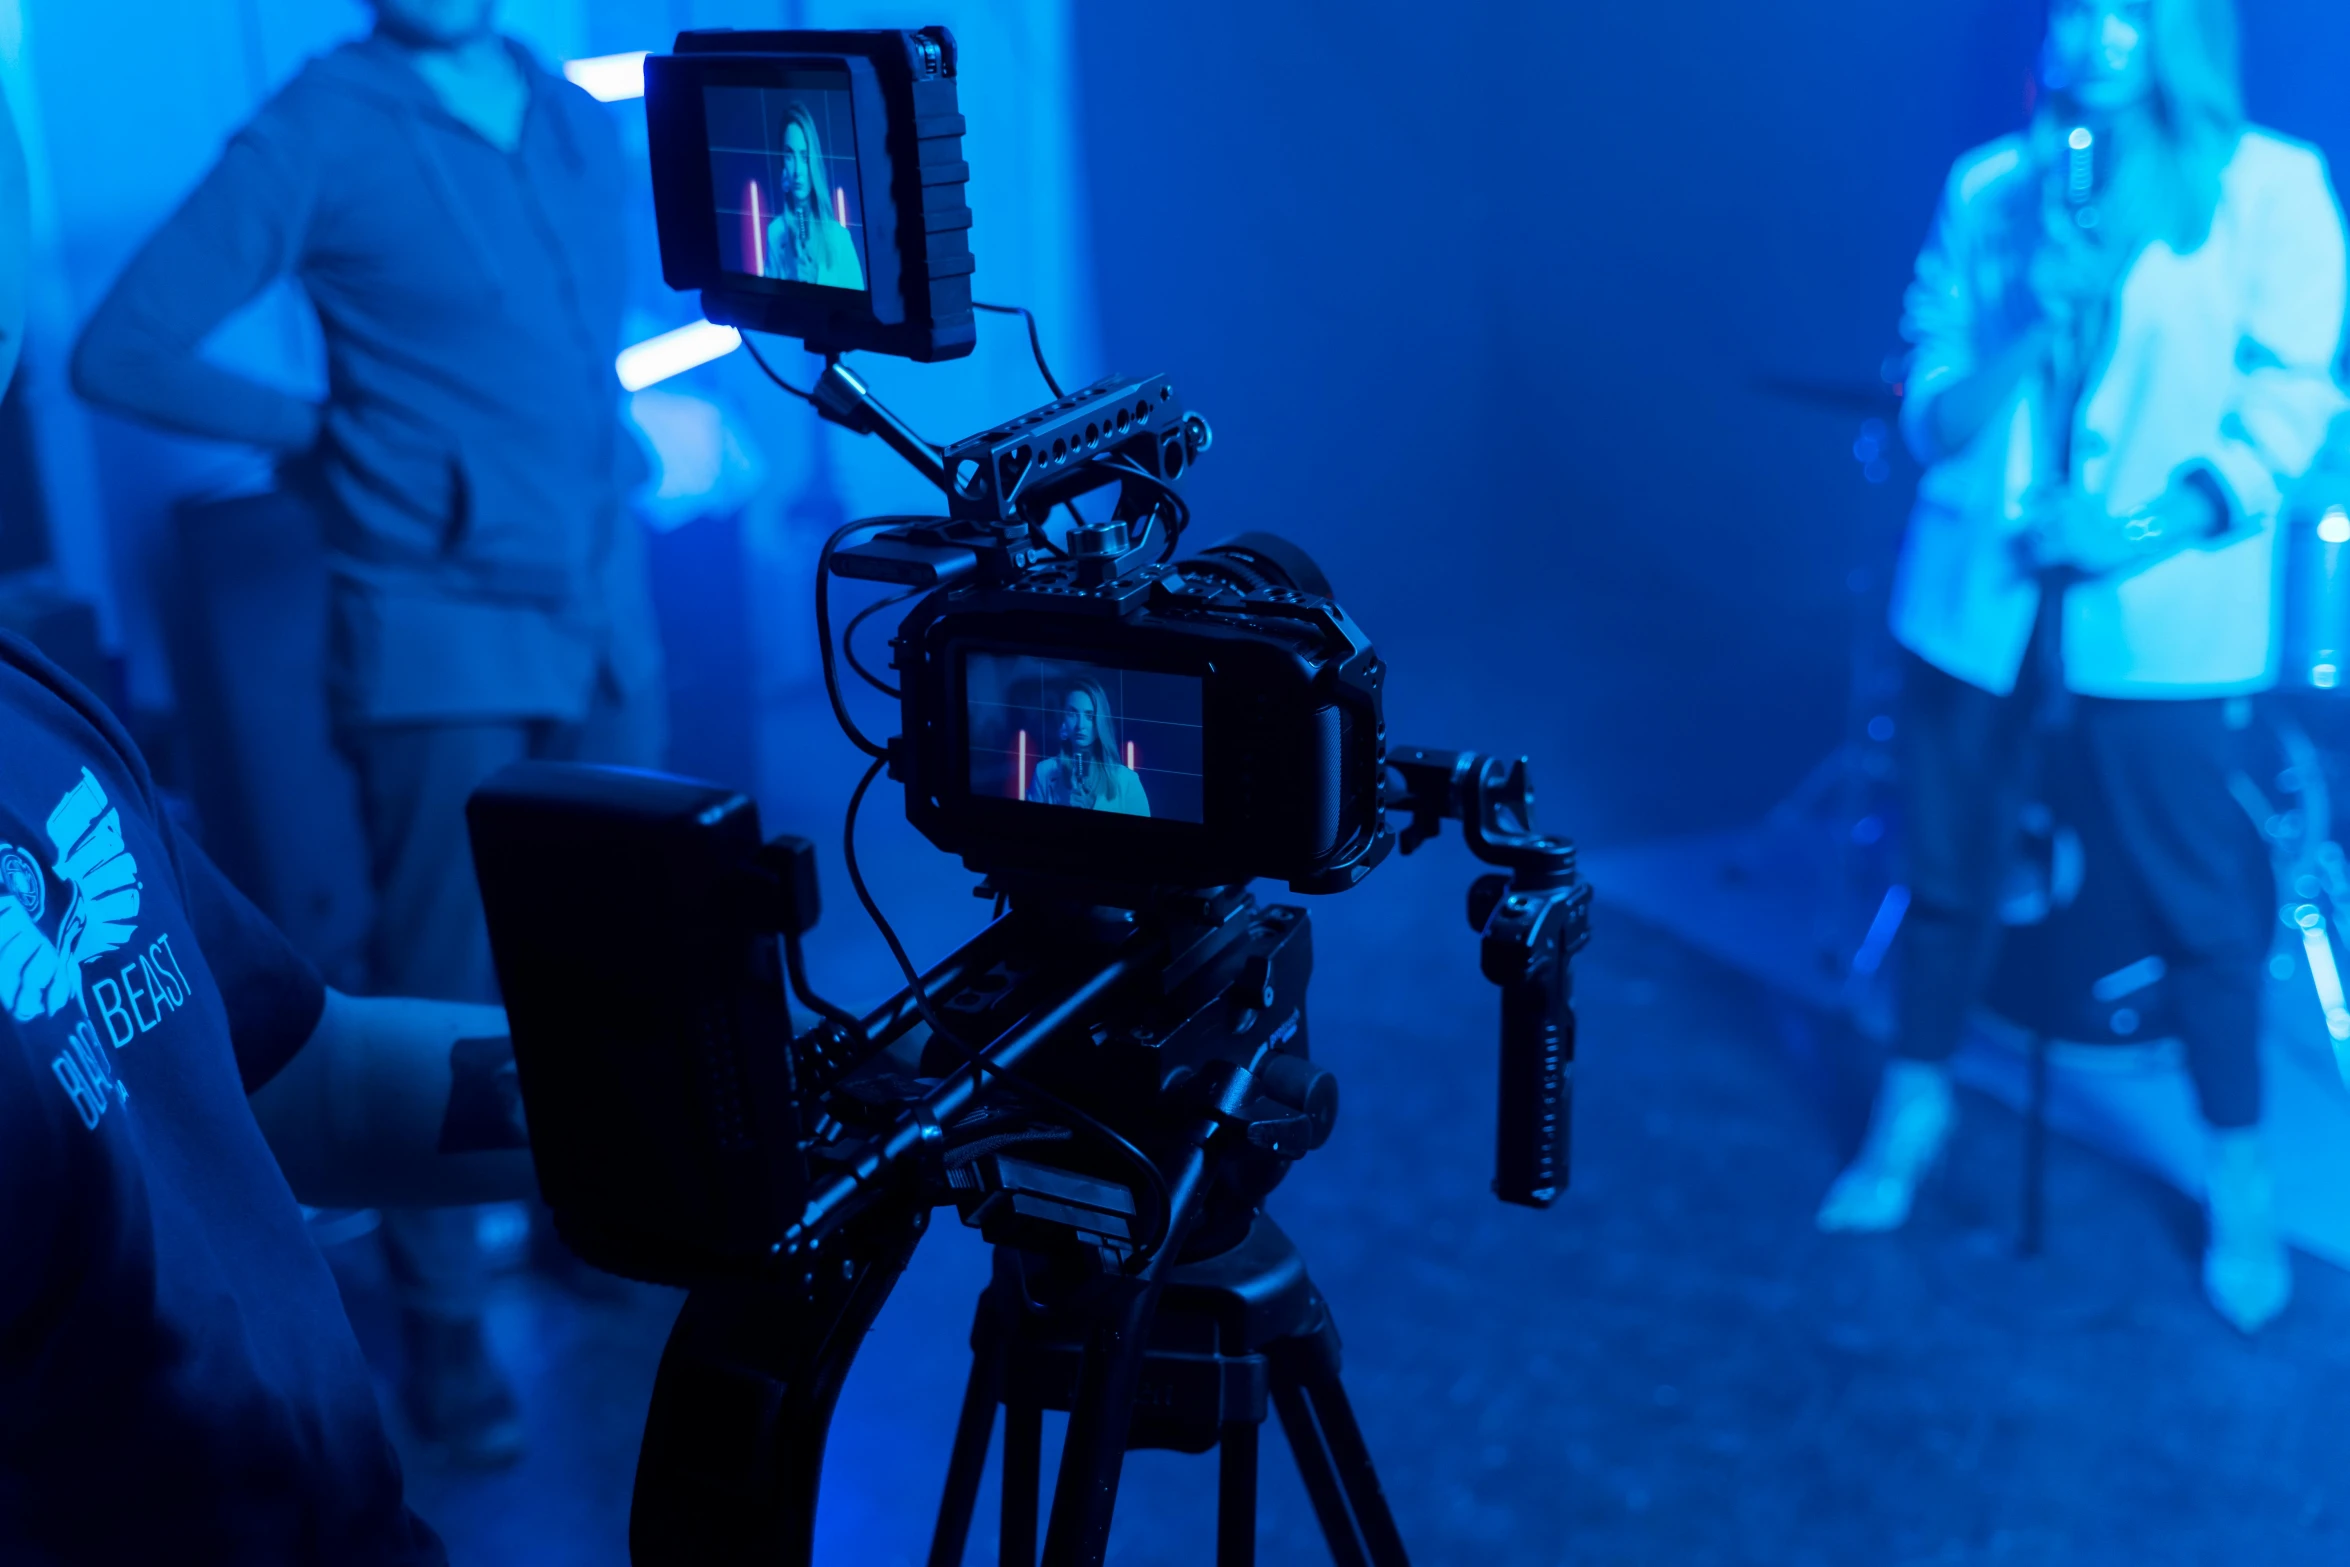 a man standing next to a camera on a tripod, shutterstock, video art, cinematic blue lighting, movie set”, instagram post, live-action archival footage